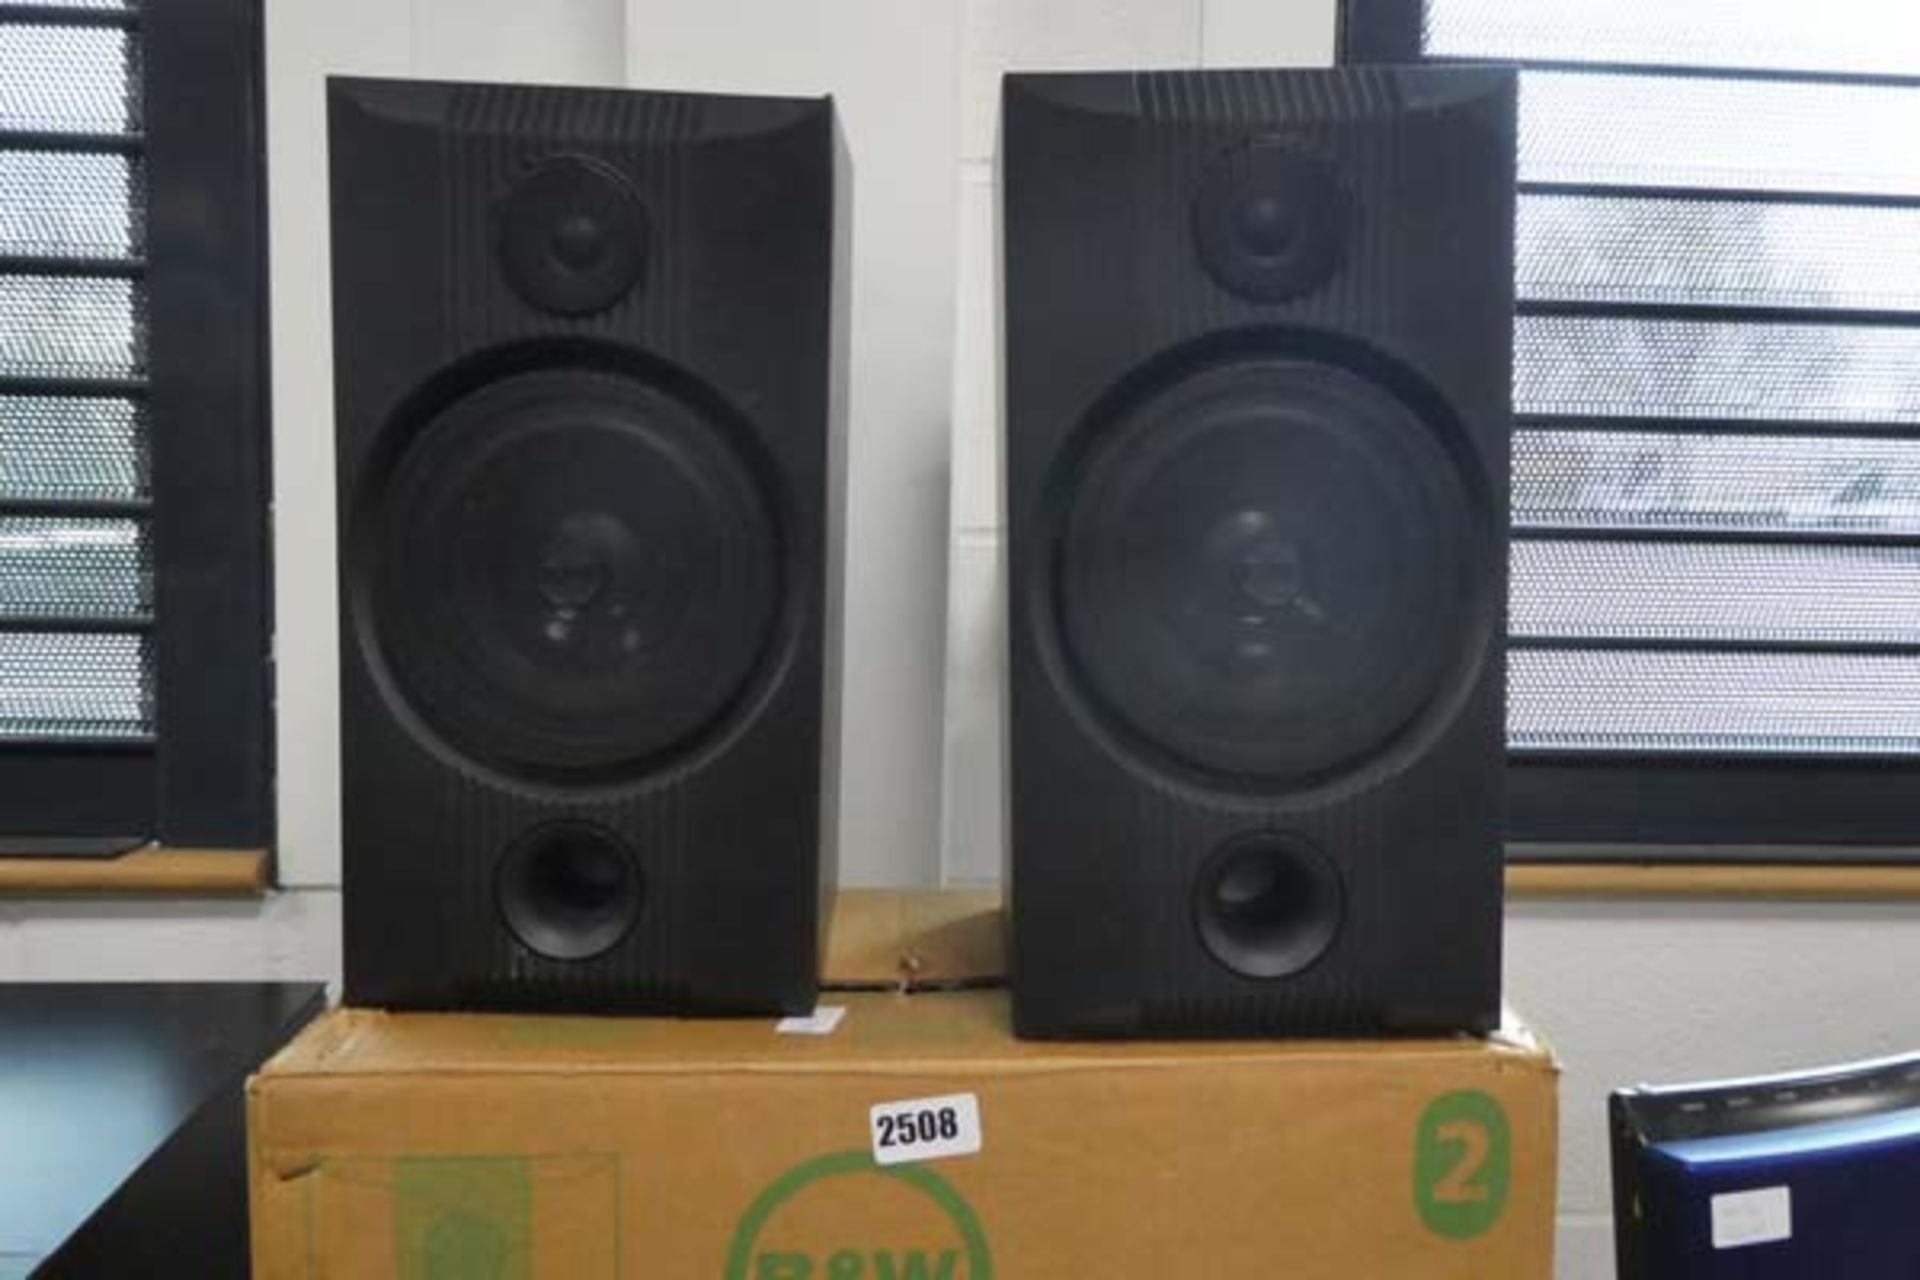 Pair of Bowers & Wilkins 2002 stereo speakers with original box